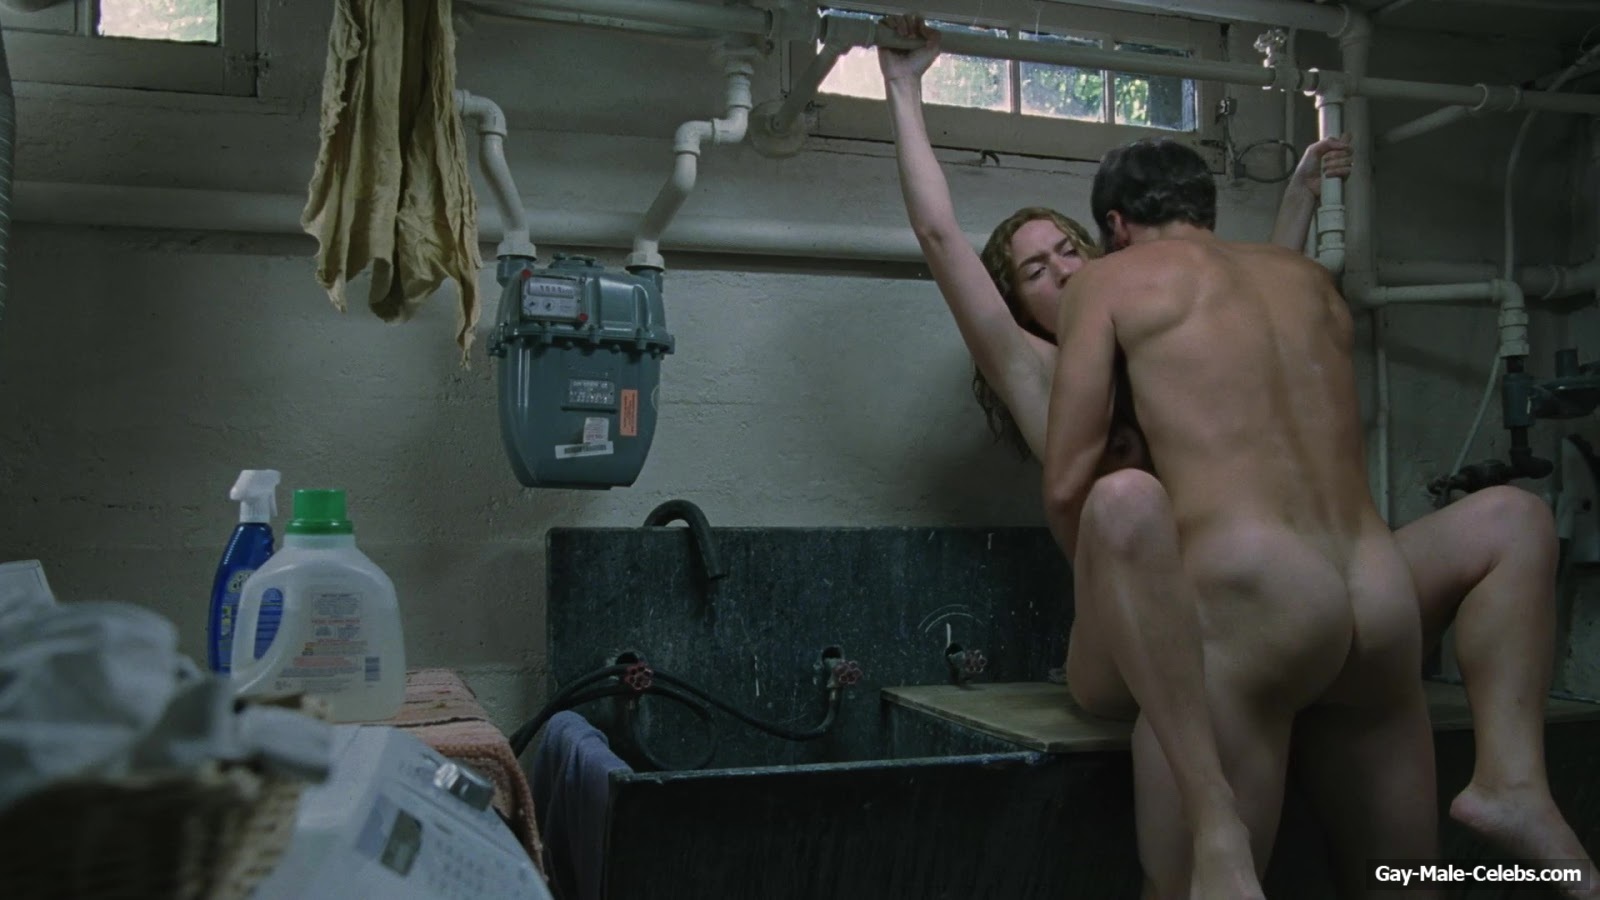 Patrick Wilson feels confident enough to appear nude in front of the camera...